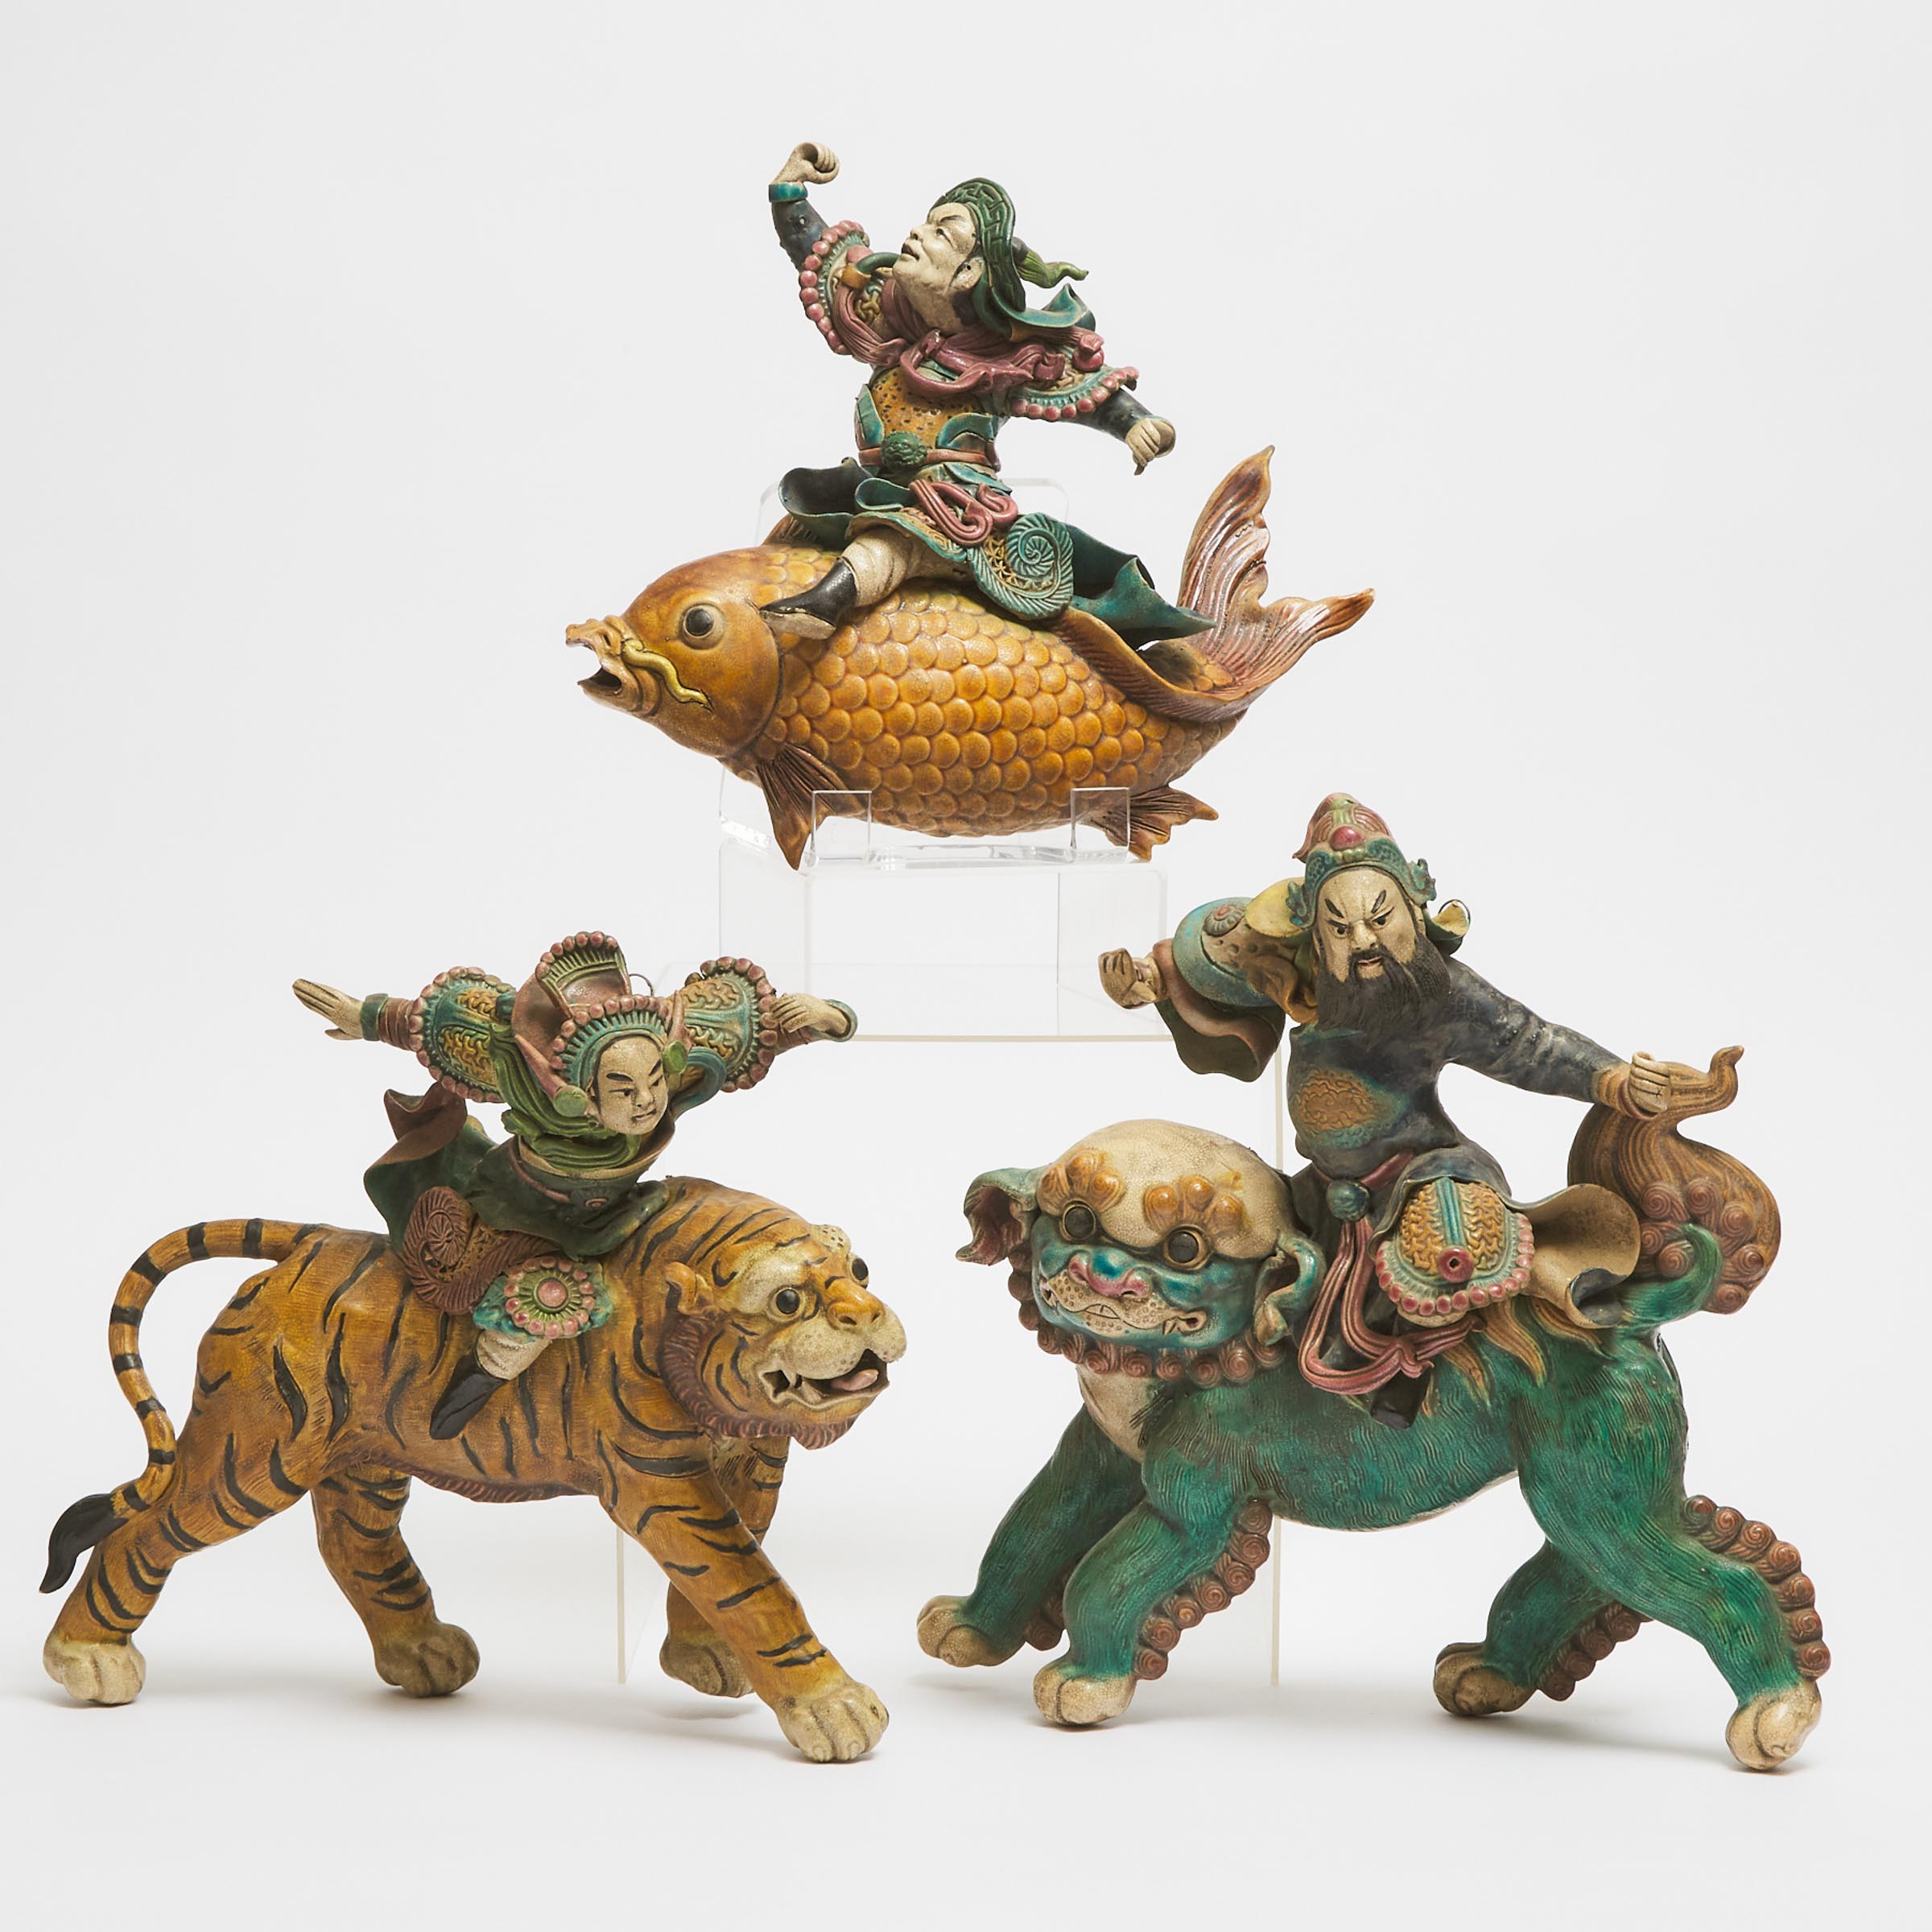 A Group of Three Sancai-Glazed Pottery Tile Warriors Riding Beasts, Early 20th Century